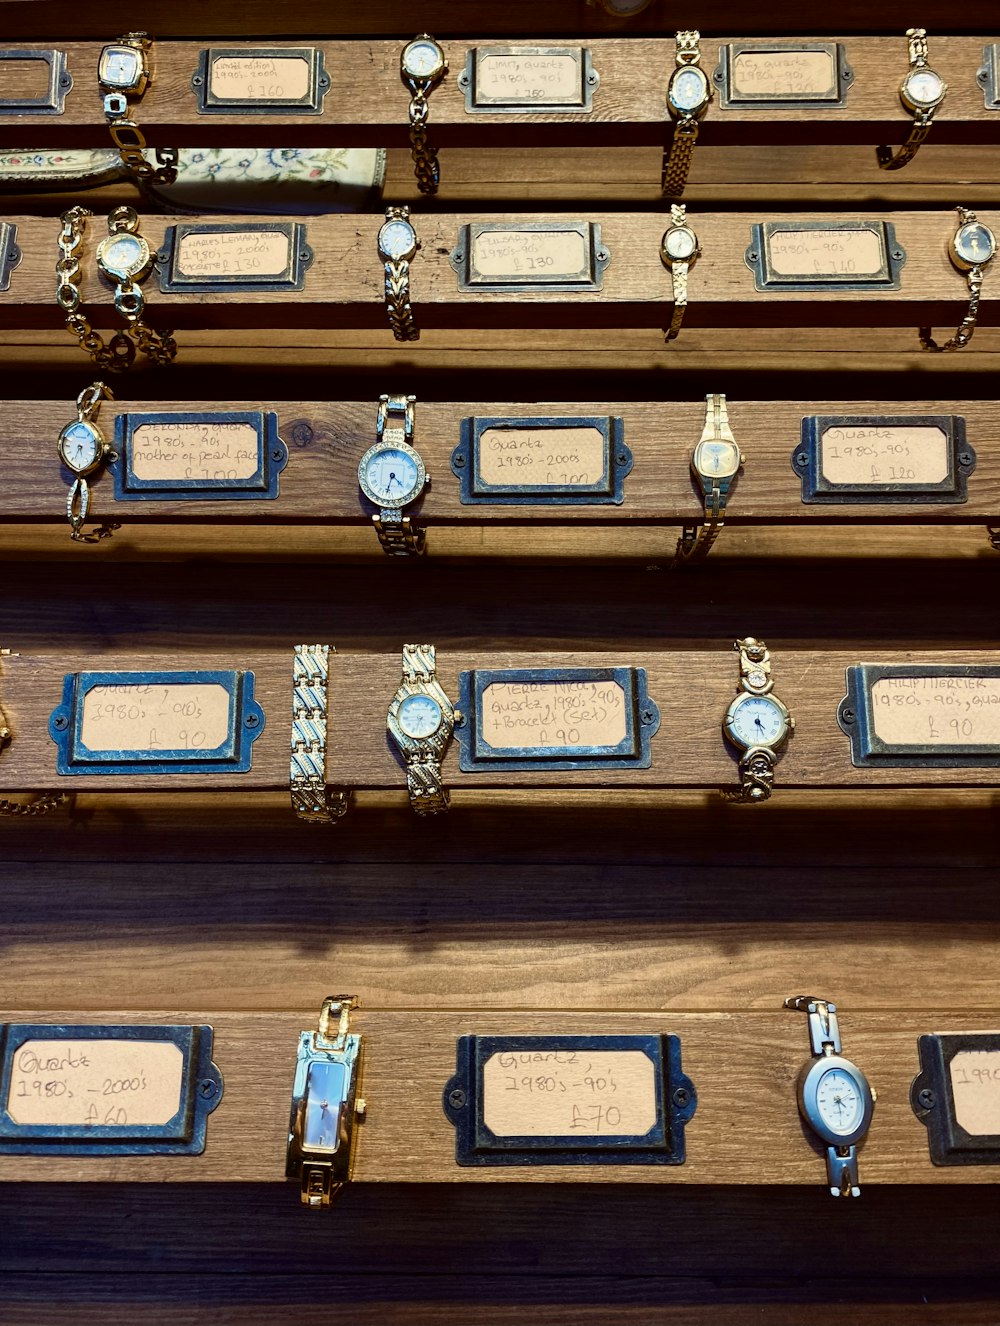 a collection of watches on display in a wooden case